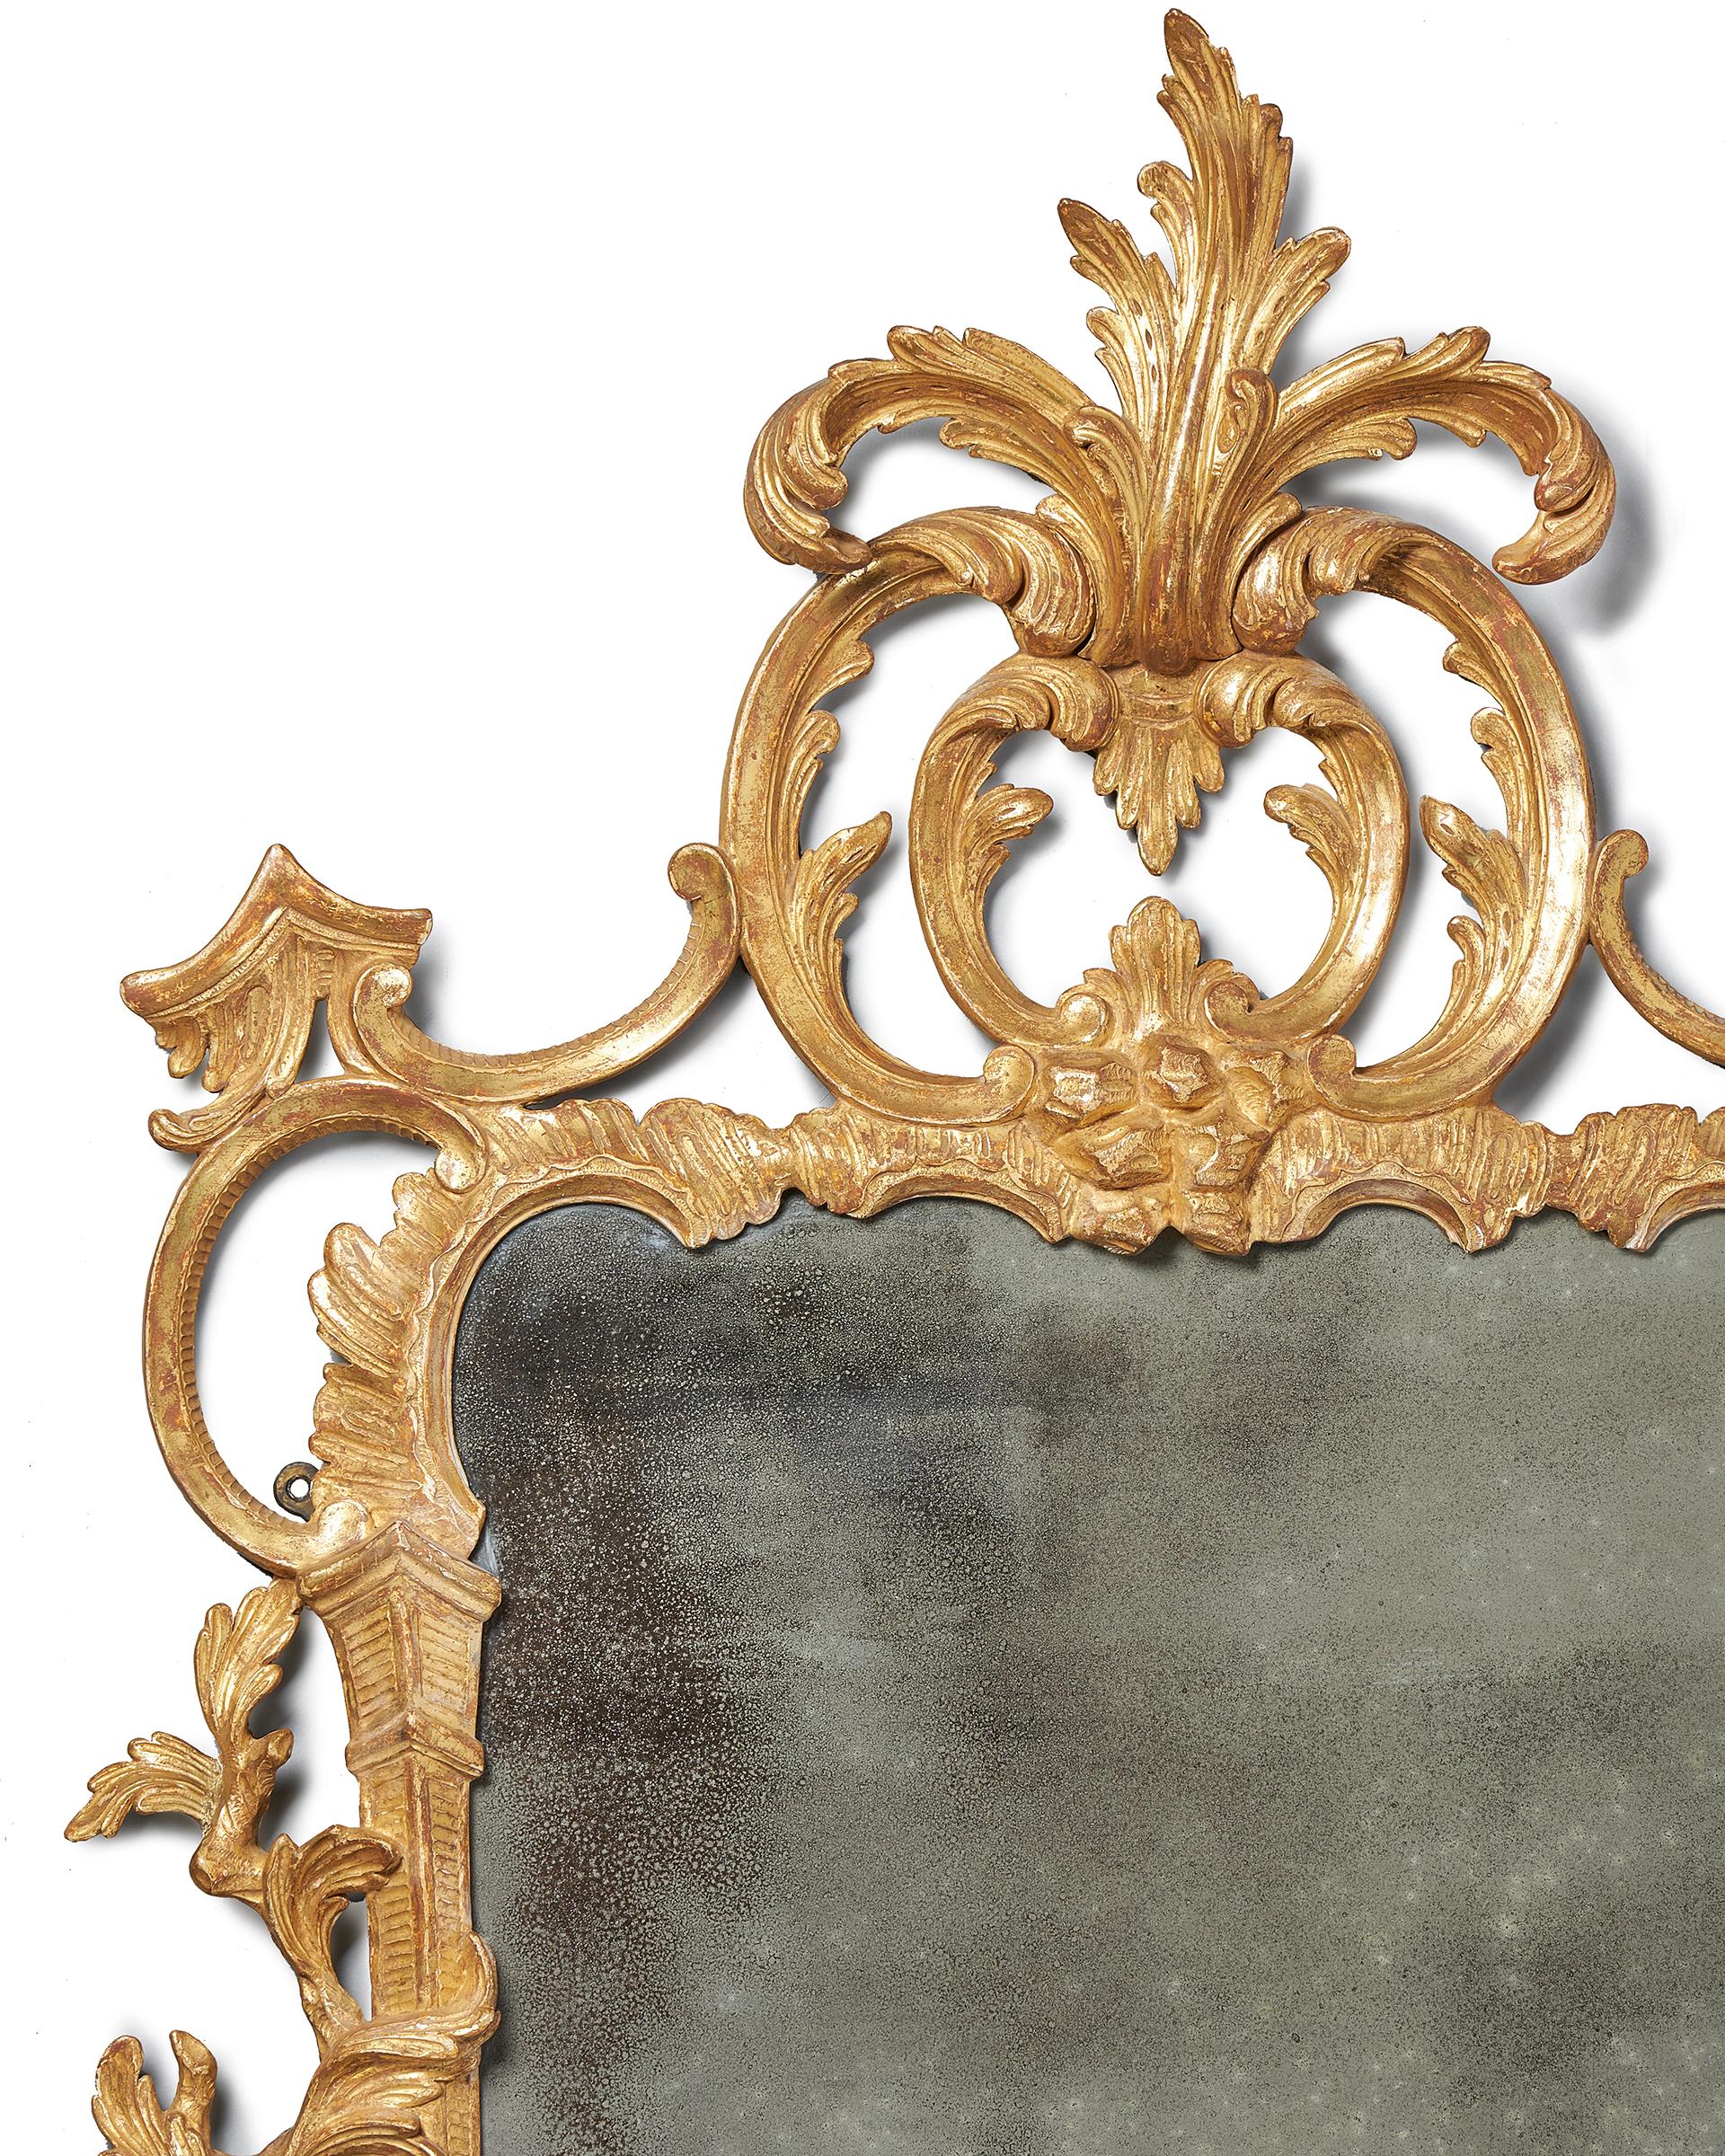 A rare and important George III 18th century Chippendale gilt mirror. 
The plate is within a carved foliate branch C-scroll, rocaille and acanthus carved surround, surmounted by an elaborate acanthus spray cresting.

Measures: H 131 cm x W 68